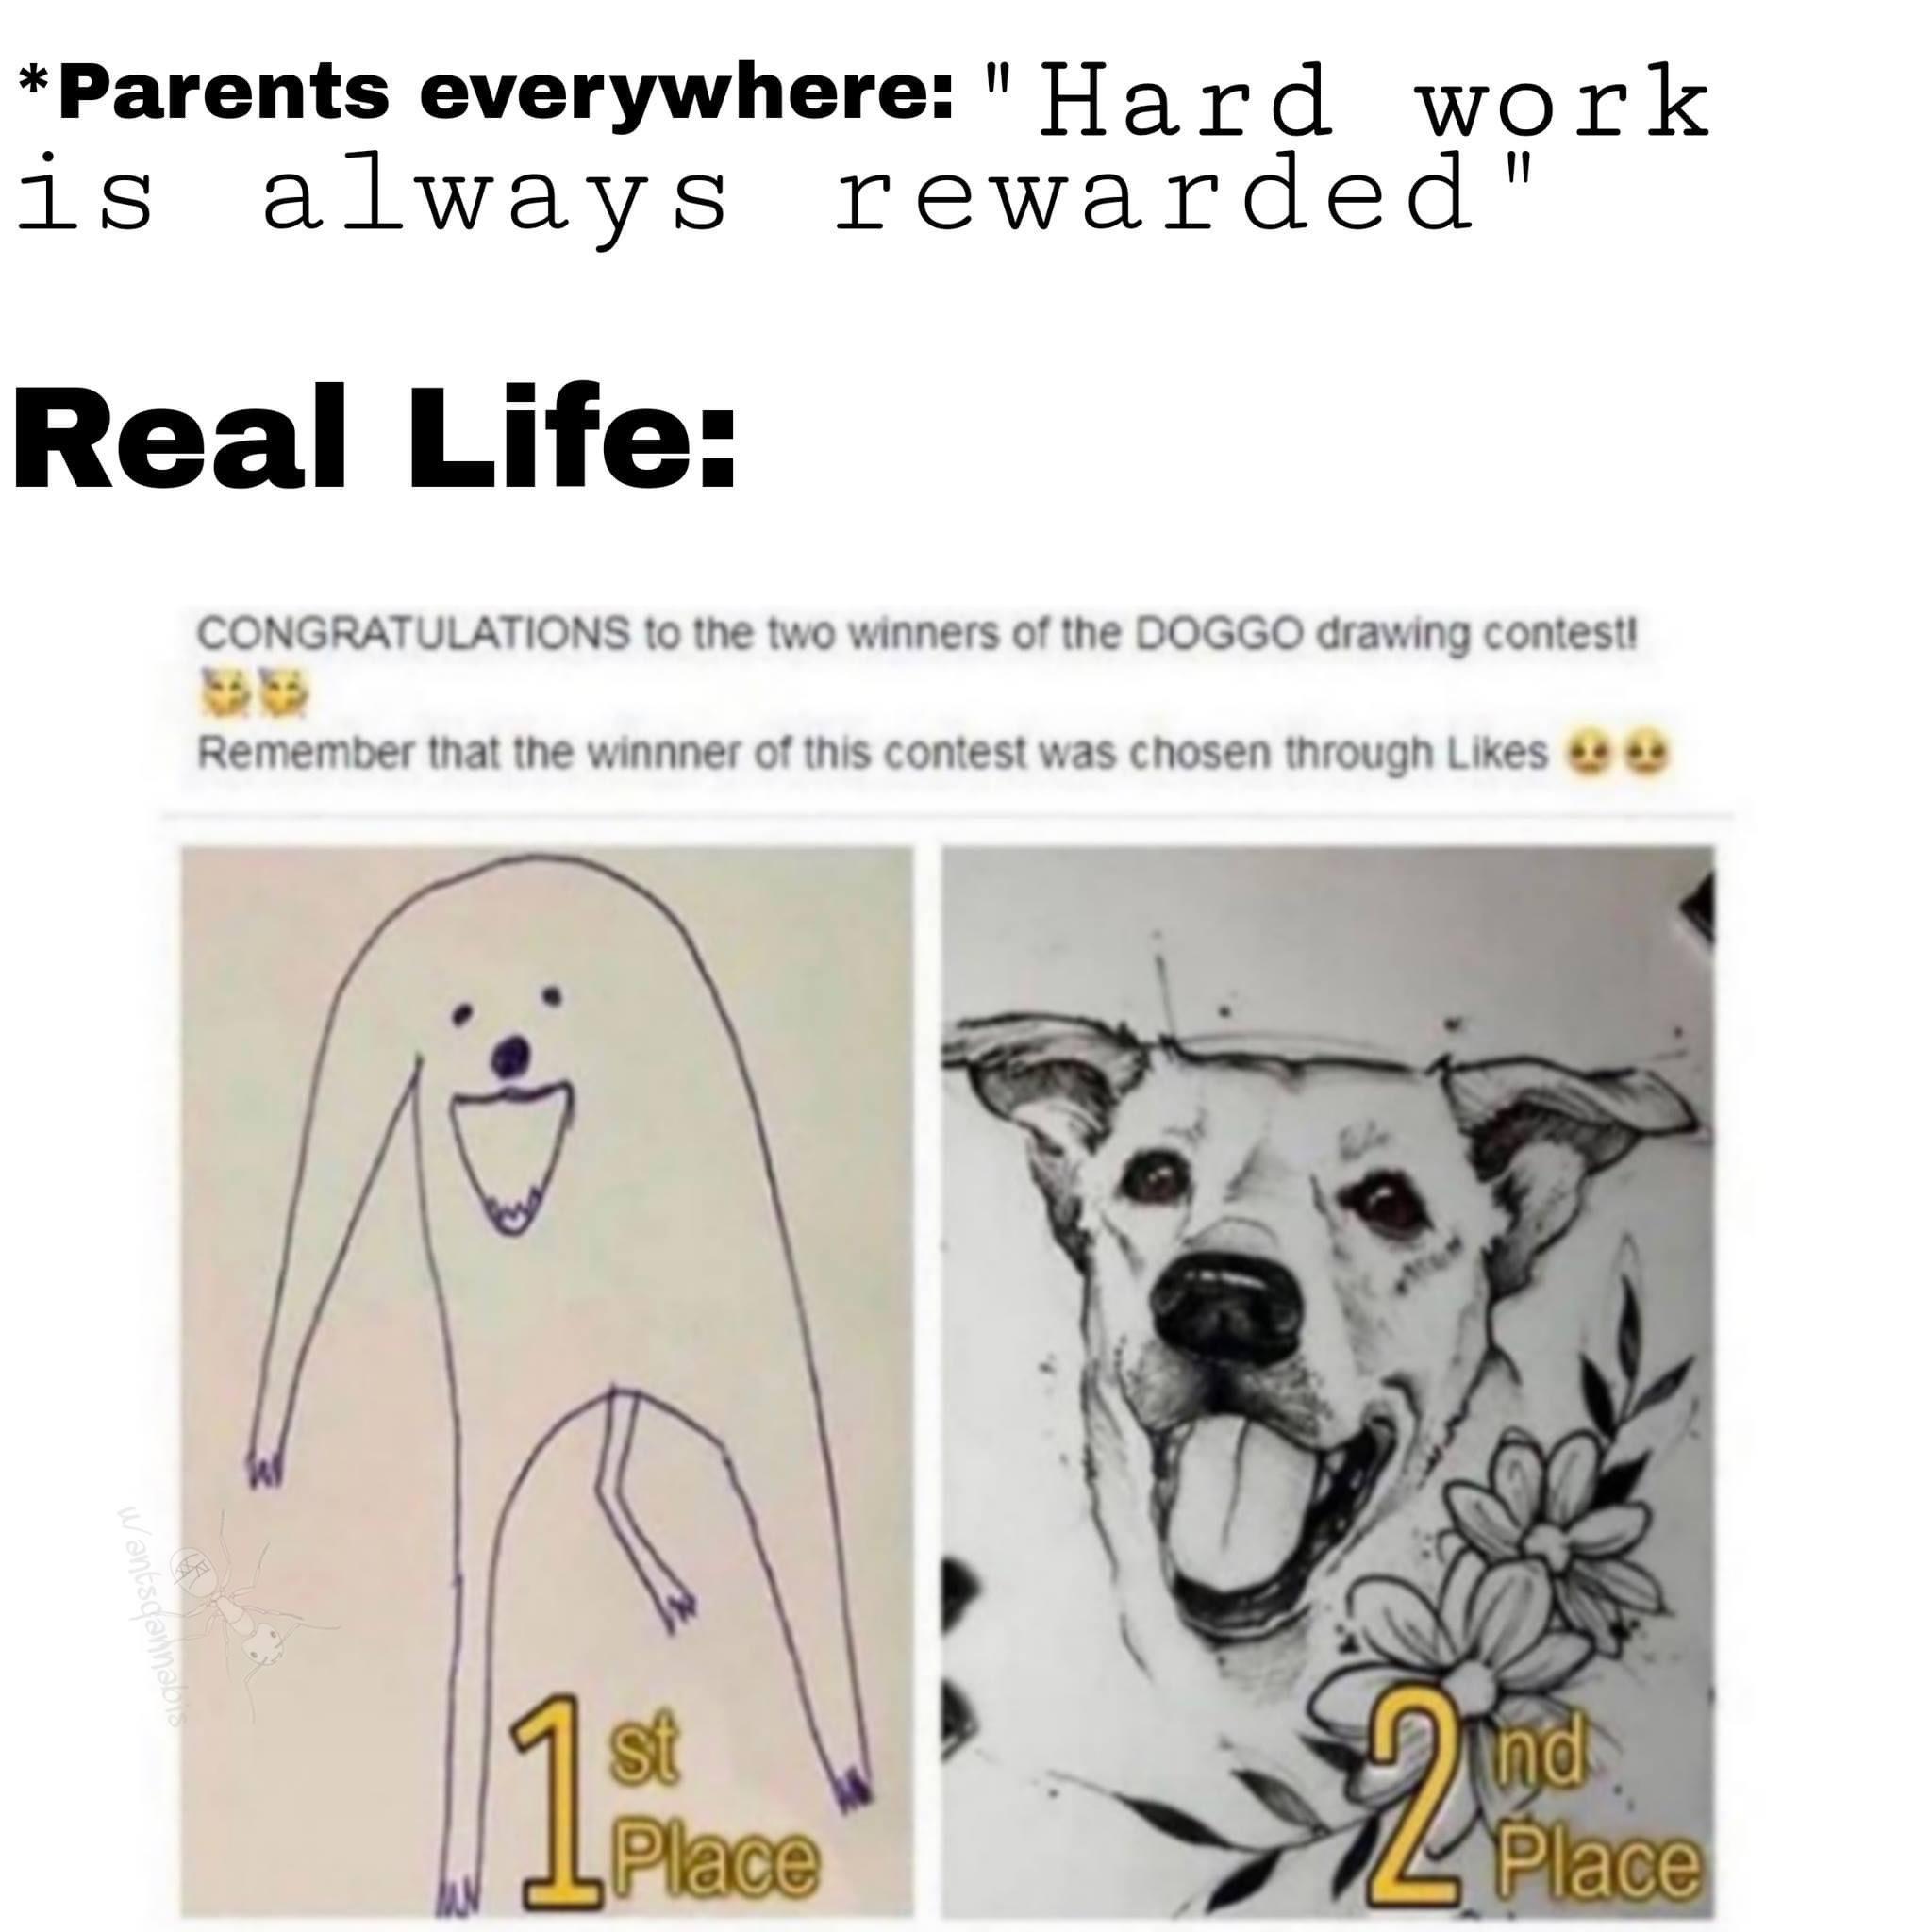 congratulations to the two winners of the doggo drawing contest - Parents everywhere "Hard work is always rewarded" Real Life Congratulations to the two winners of the Doggo drawing contest! Remember that the winnner of this contest was chosen through Wan